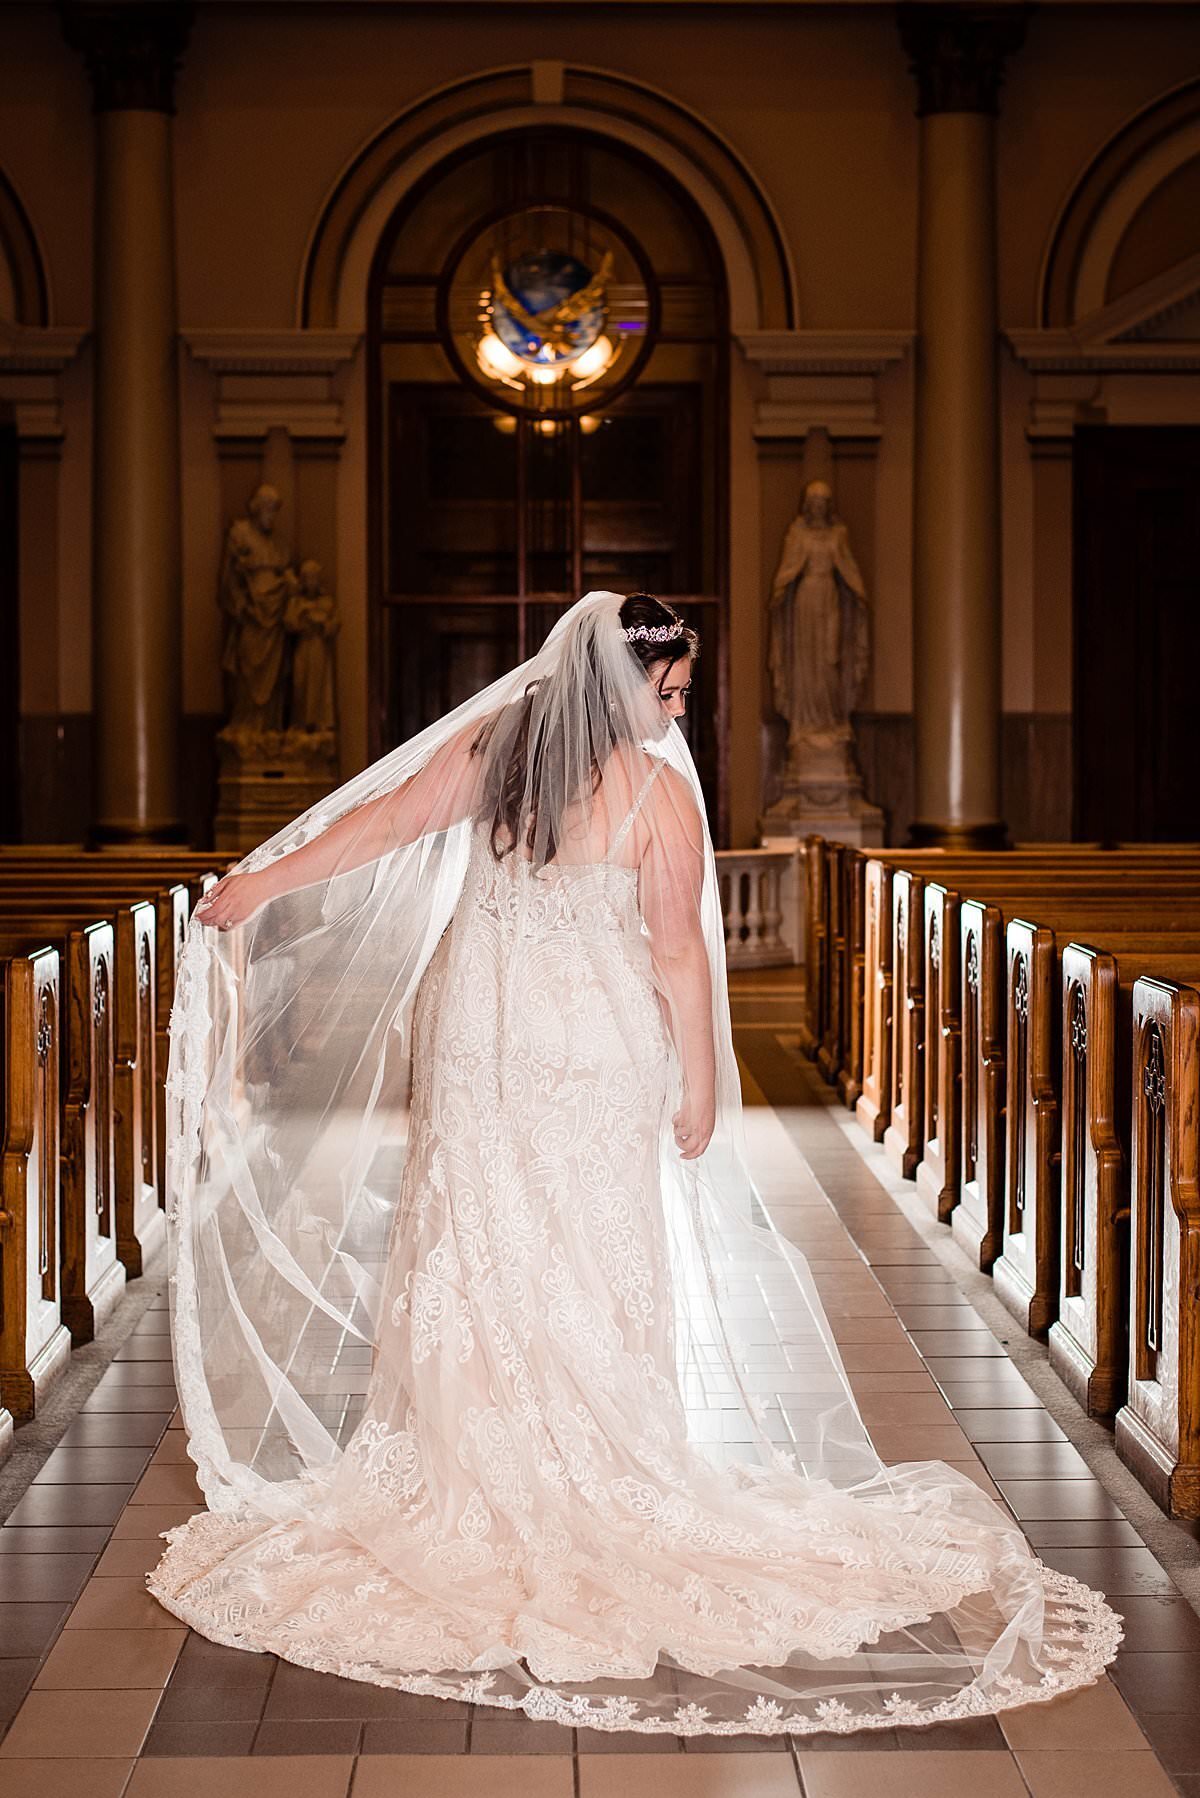 Bride standing in aisle at cathedral of incarnation with her cathedral veil behind her